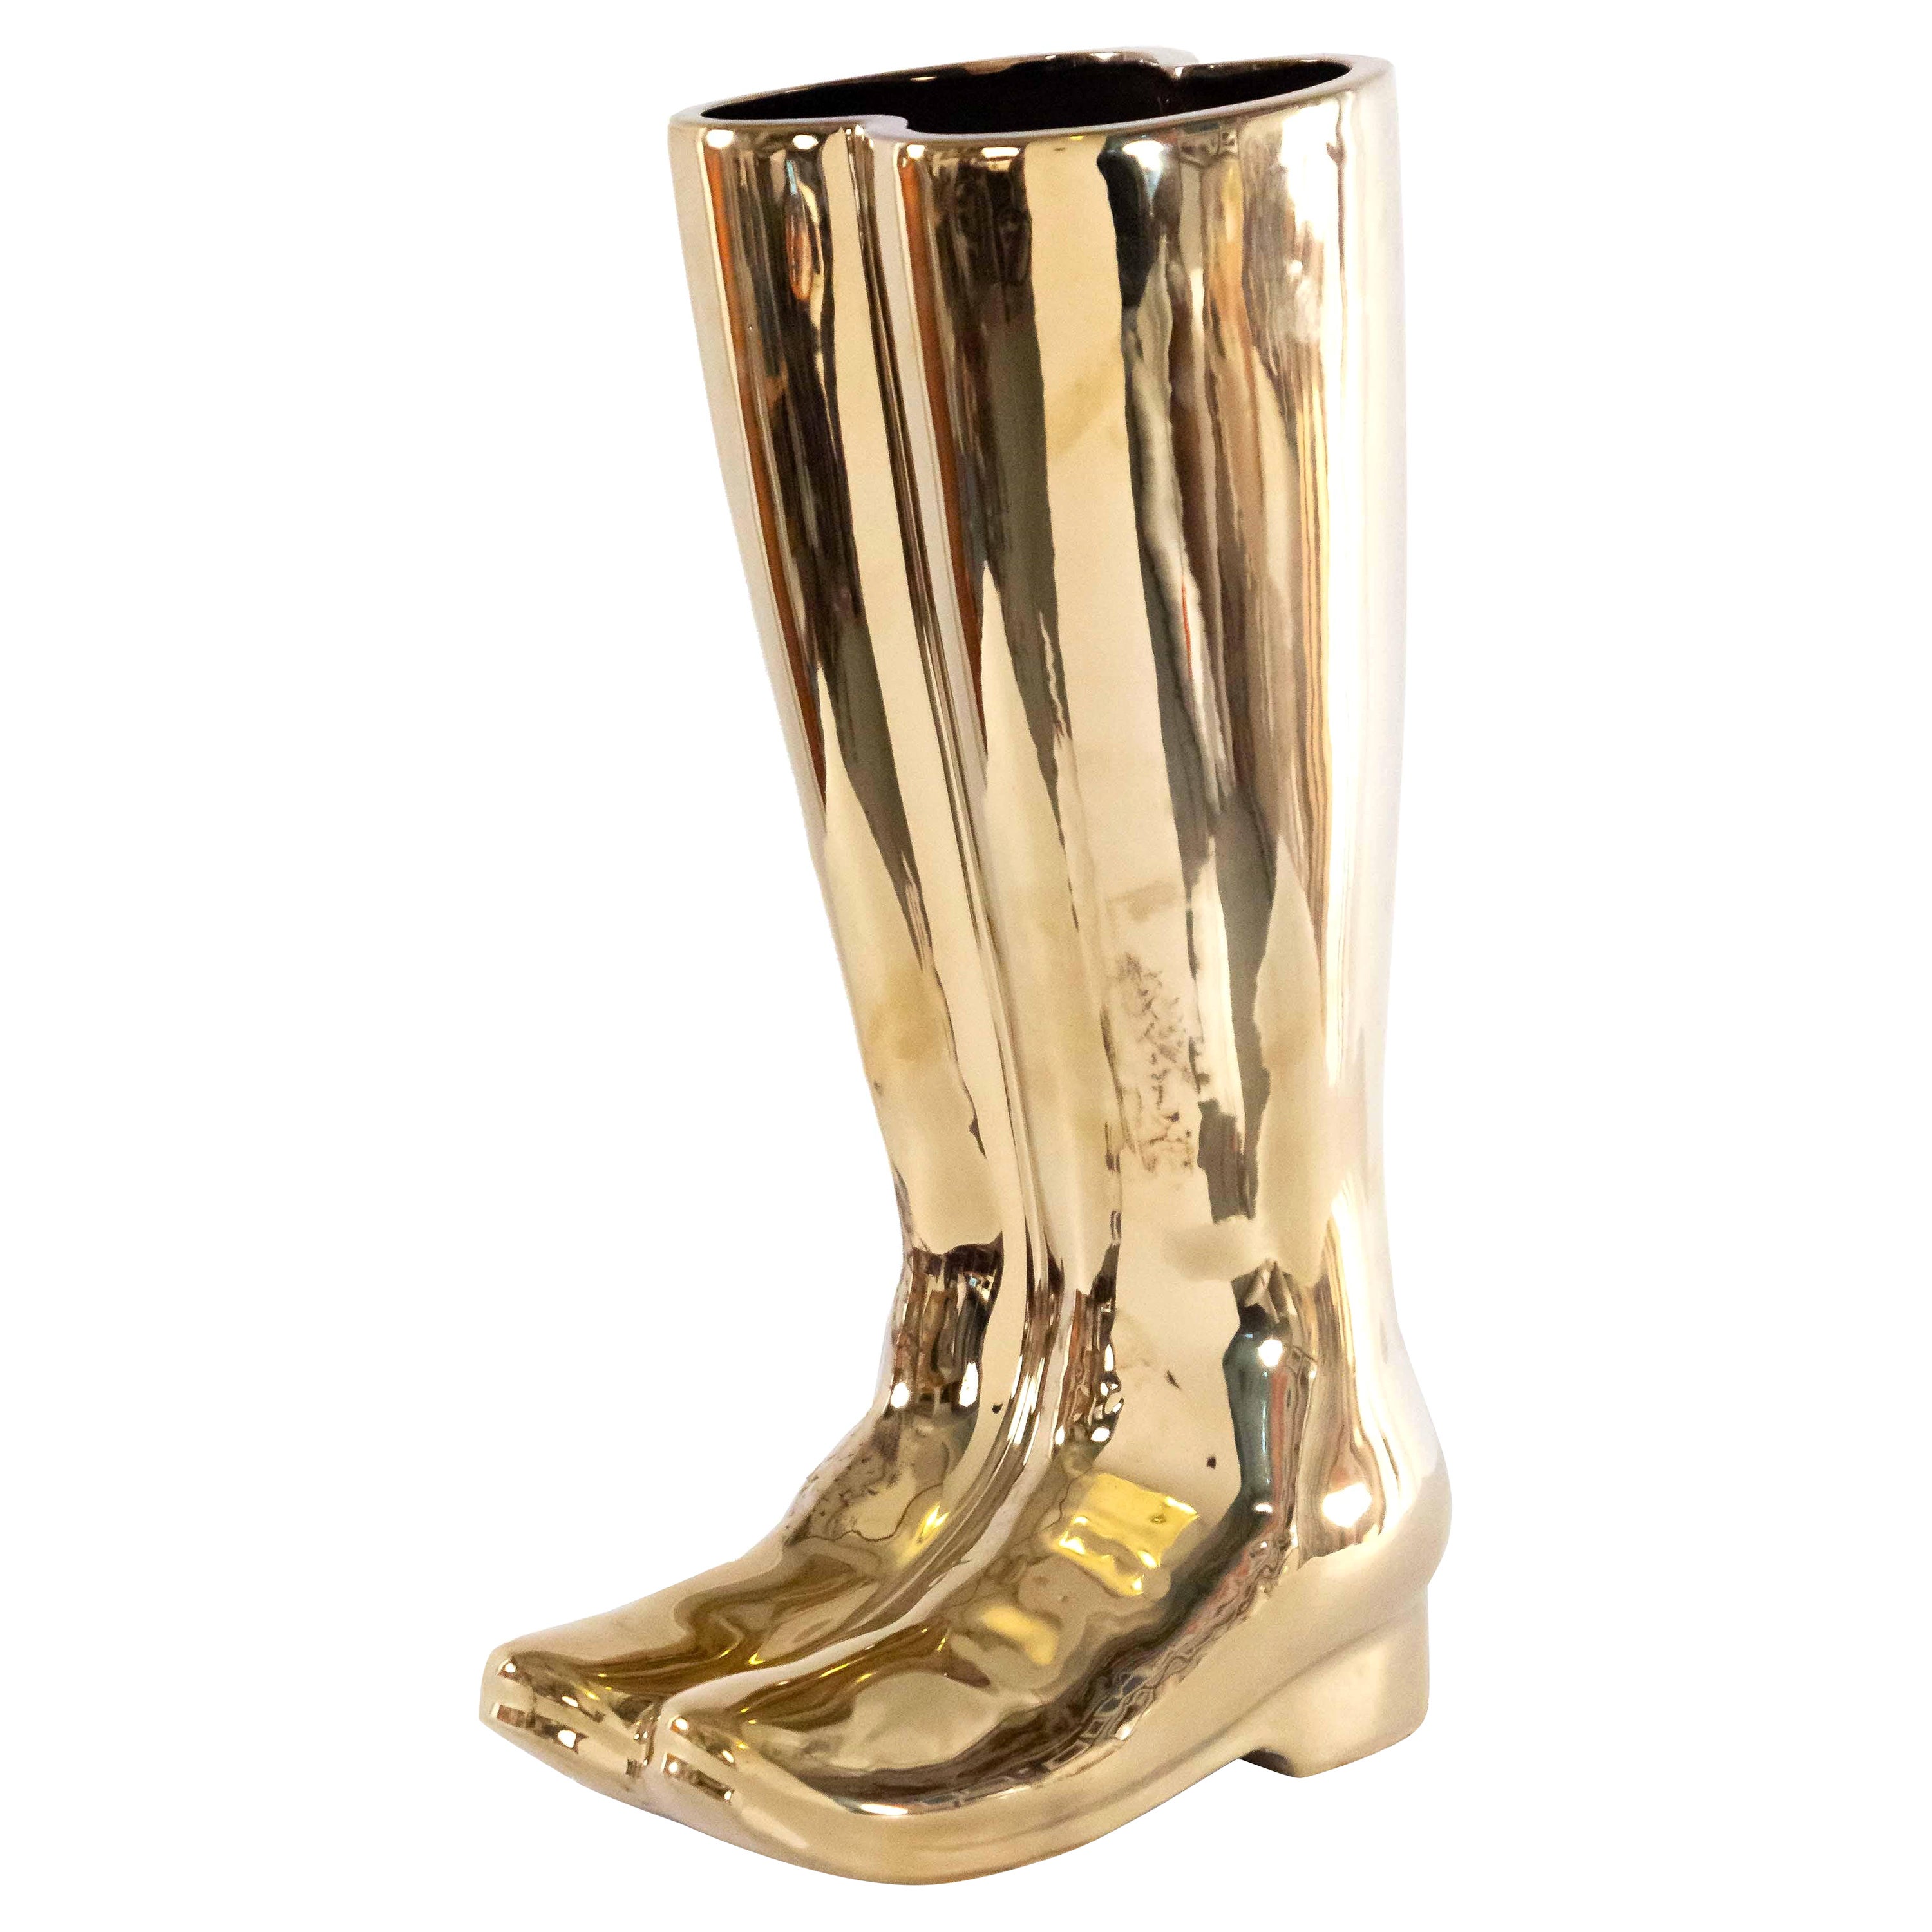 Brass Rainboot-Shaped Umbrella Stand For Sale